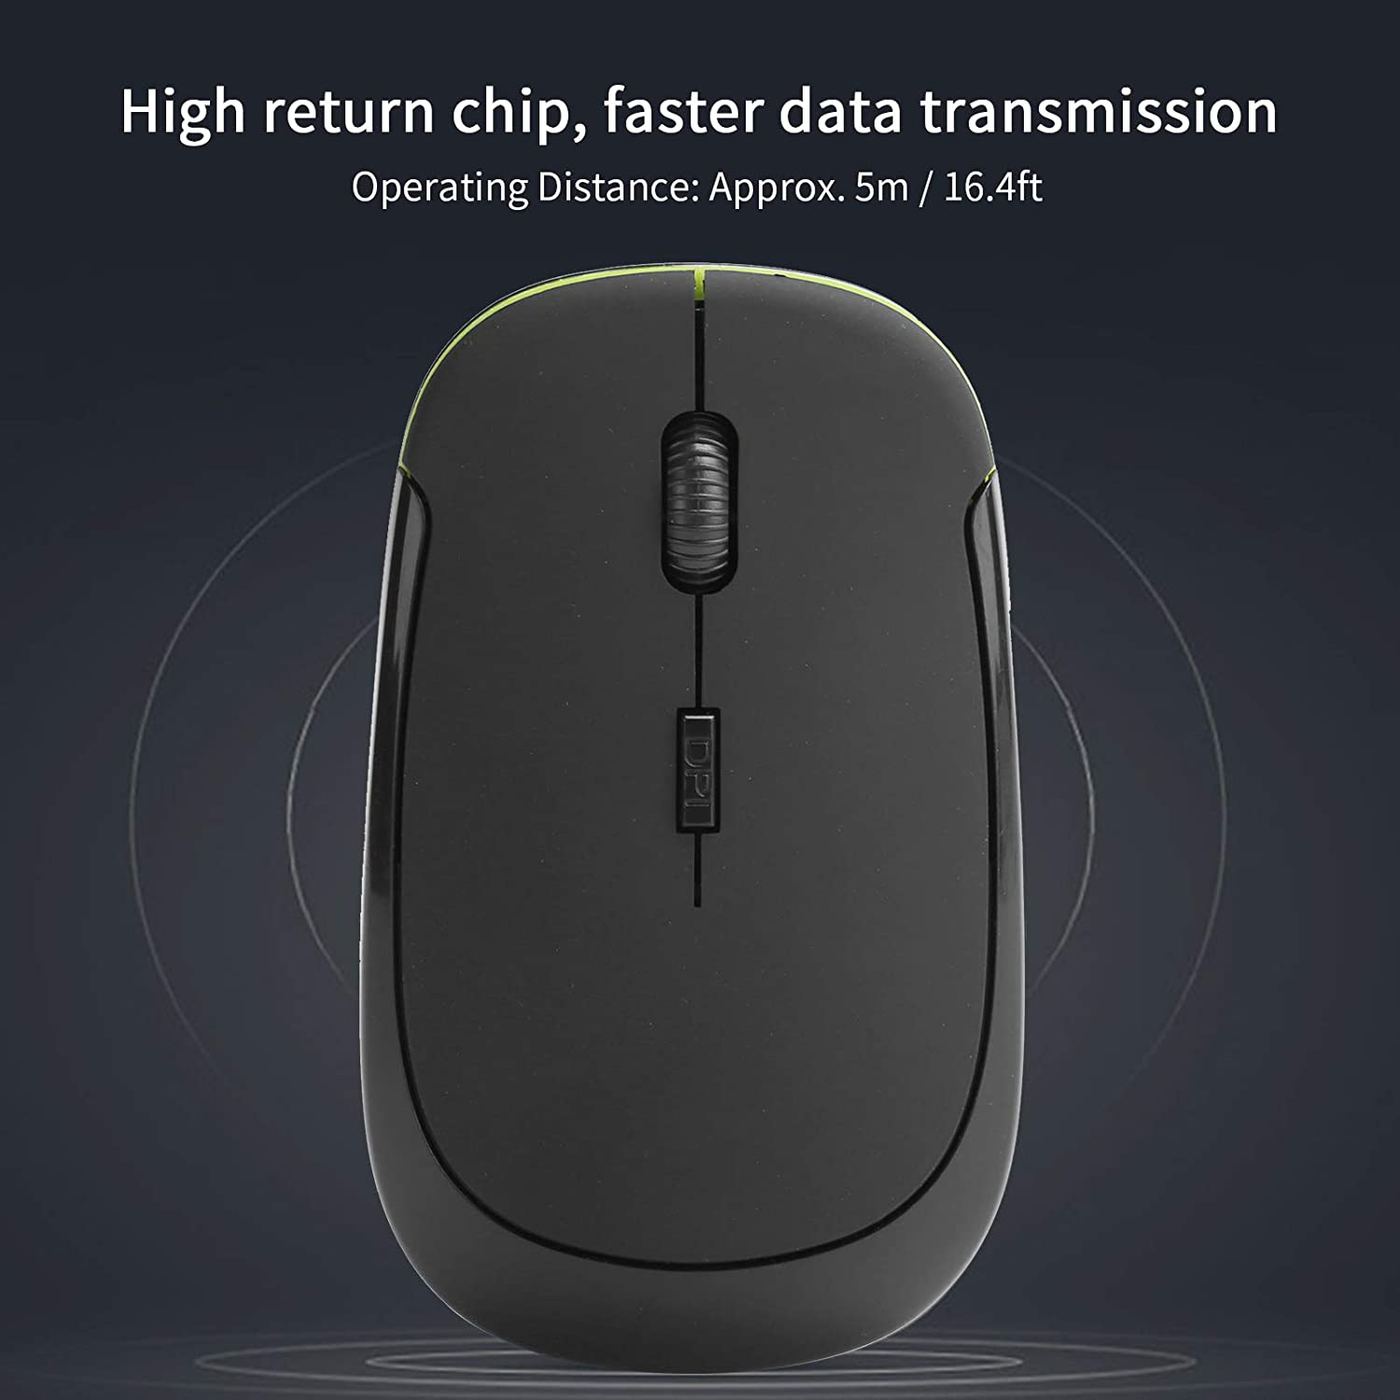 Wireless Mouse 2.4G Wreless Frequency Hopping Adjustable Optical USB Receiver Notebook Computer Accessories 1600dpi Silent Micro Motion Design Lightweight and Portable(Black)